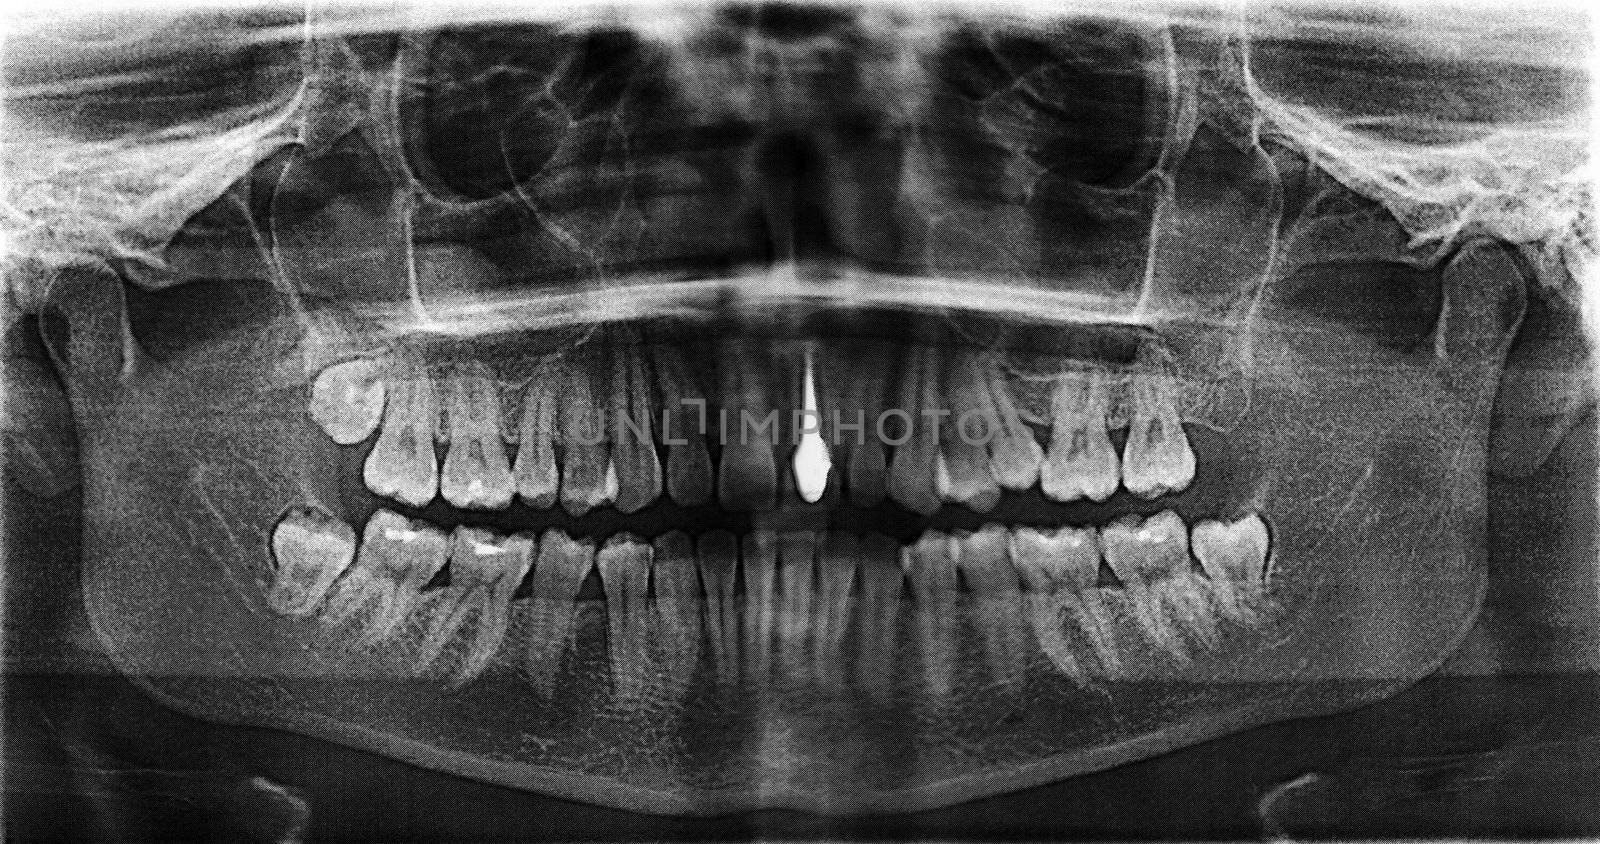 Implanted tooth | Scanned film by zakaz